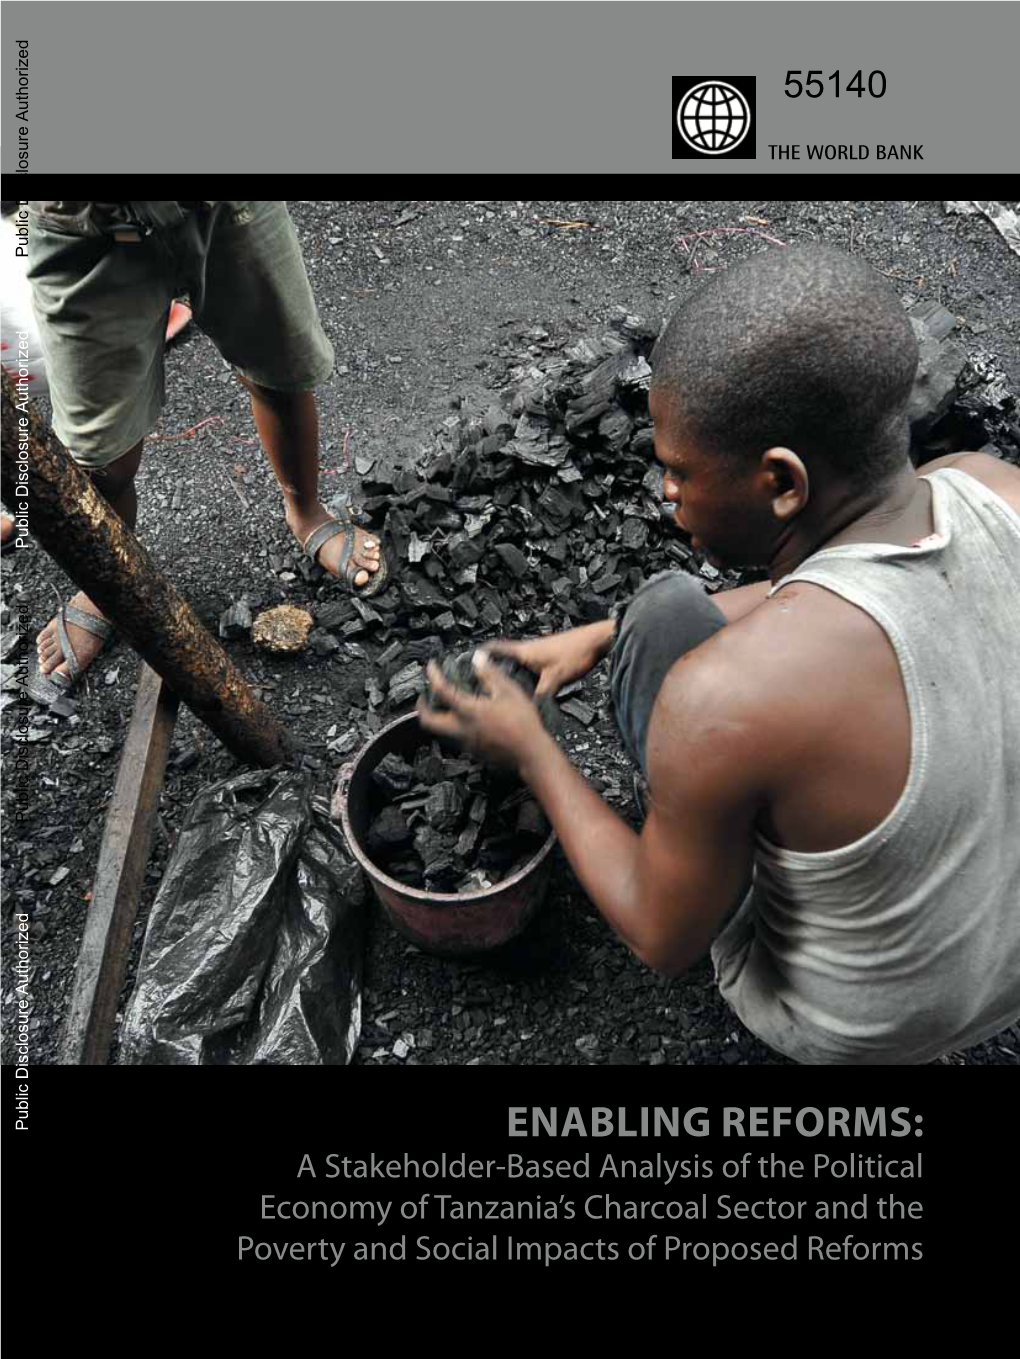 A Stakeholder-Based Analysis of the Political Economy of Tanzania's Charcoal Sector And